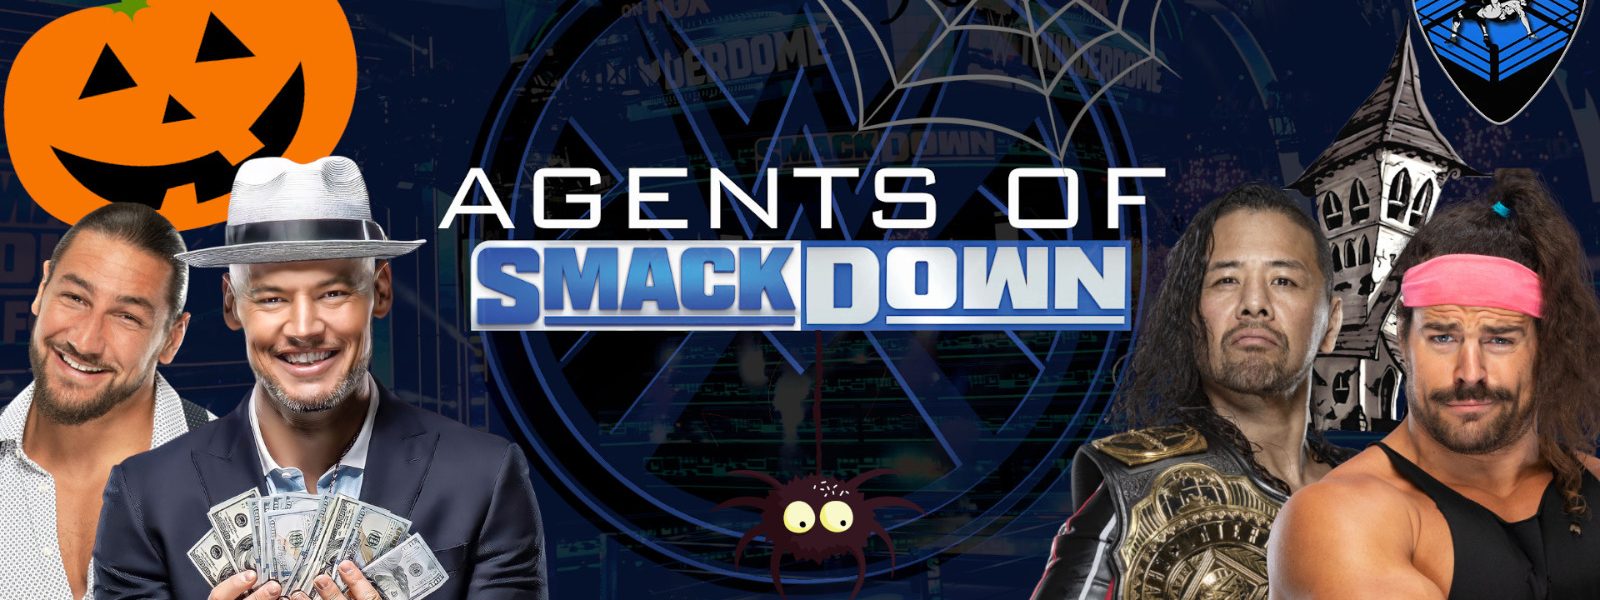 Trick or treat? - Agents Of Smackdown EP.27